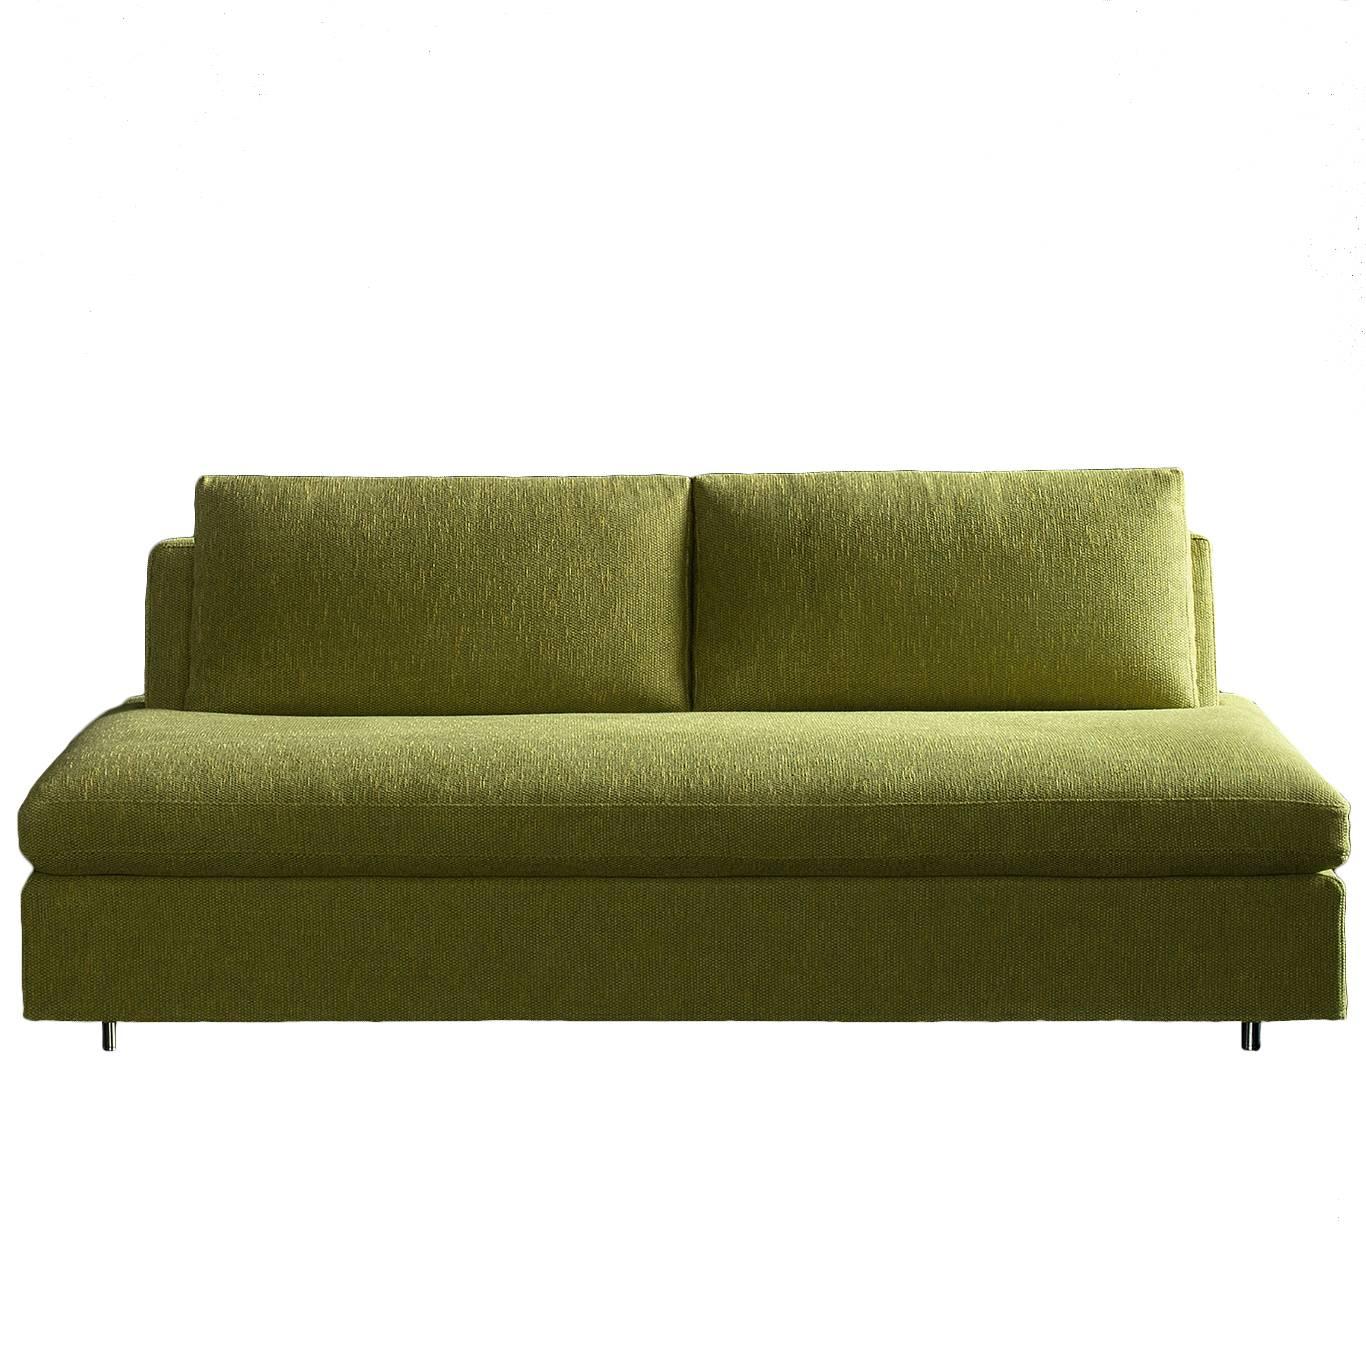 Italian Modern Sofa Bed SB46, Made in Italy, New, Fabric For Sale